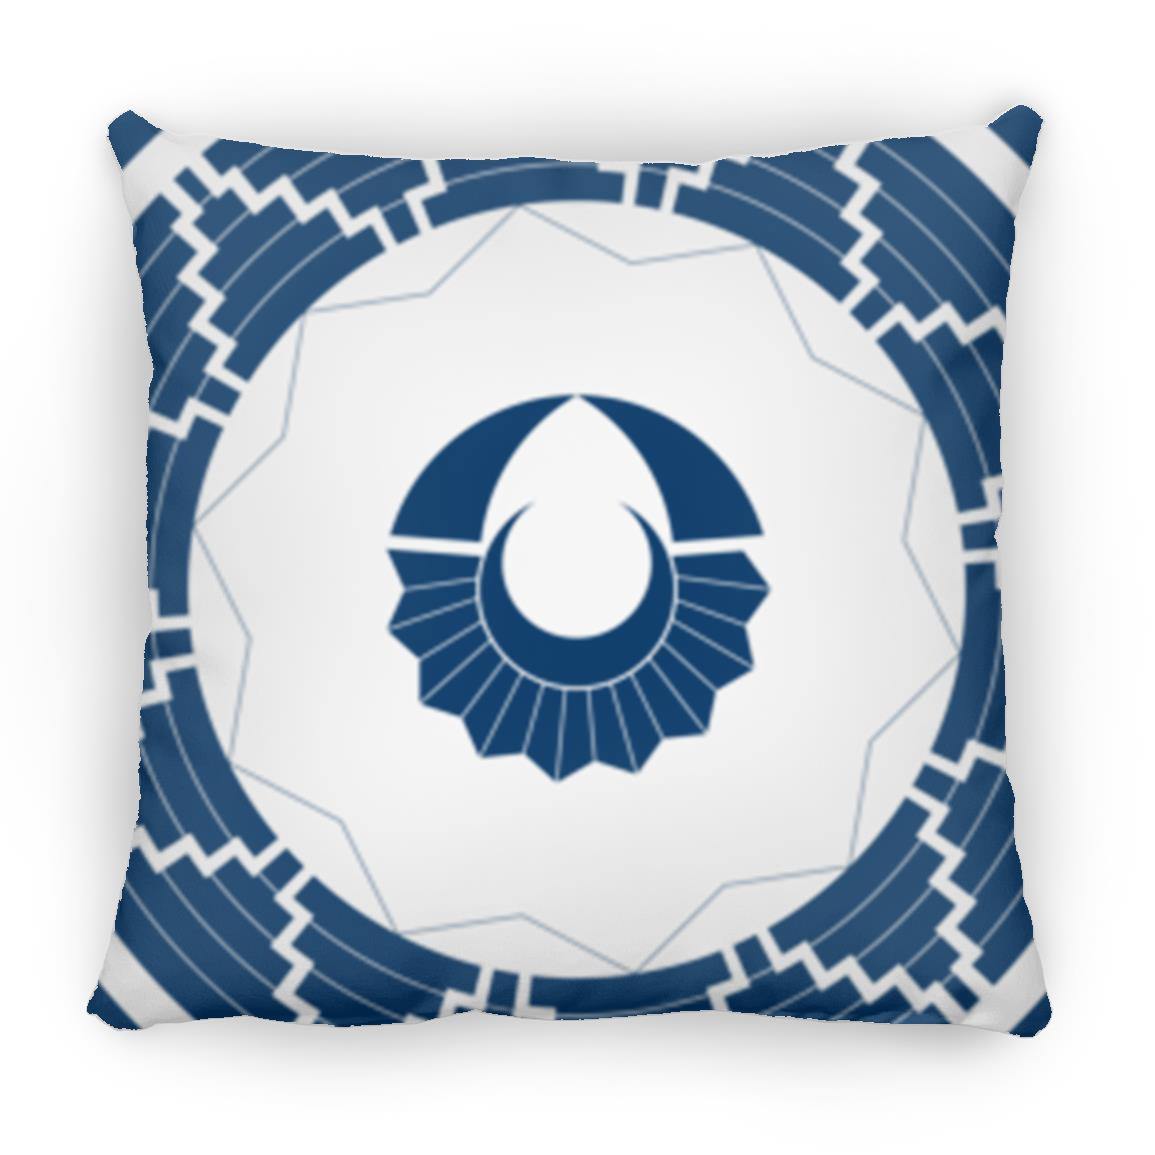 Crop Circle Pillow - East Kennet - Shapes of Wisdom